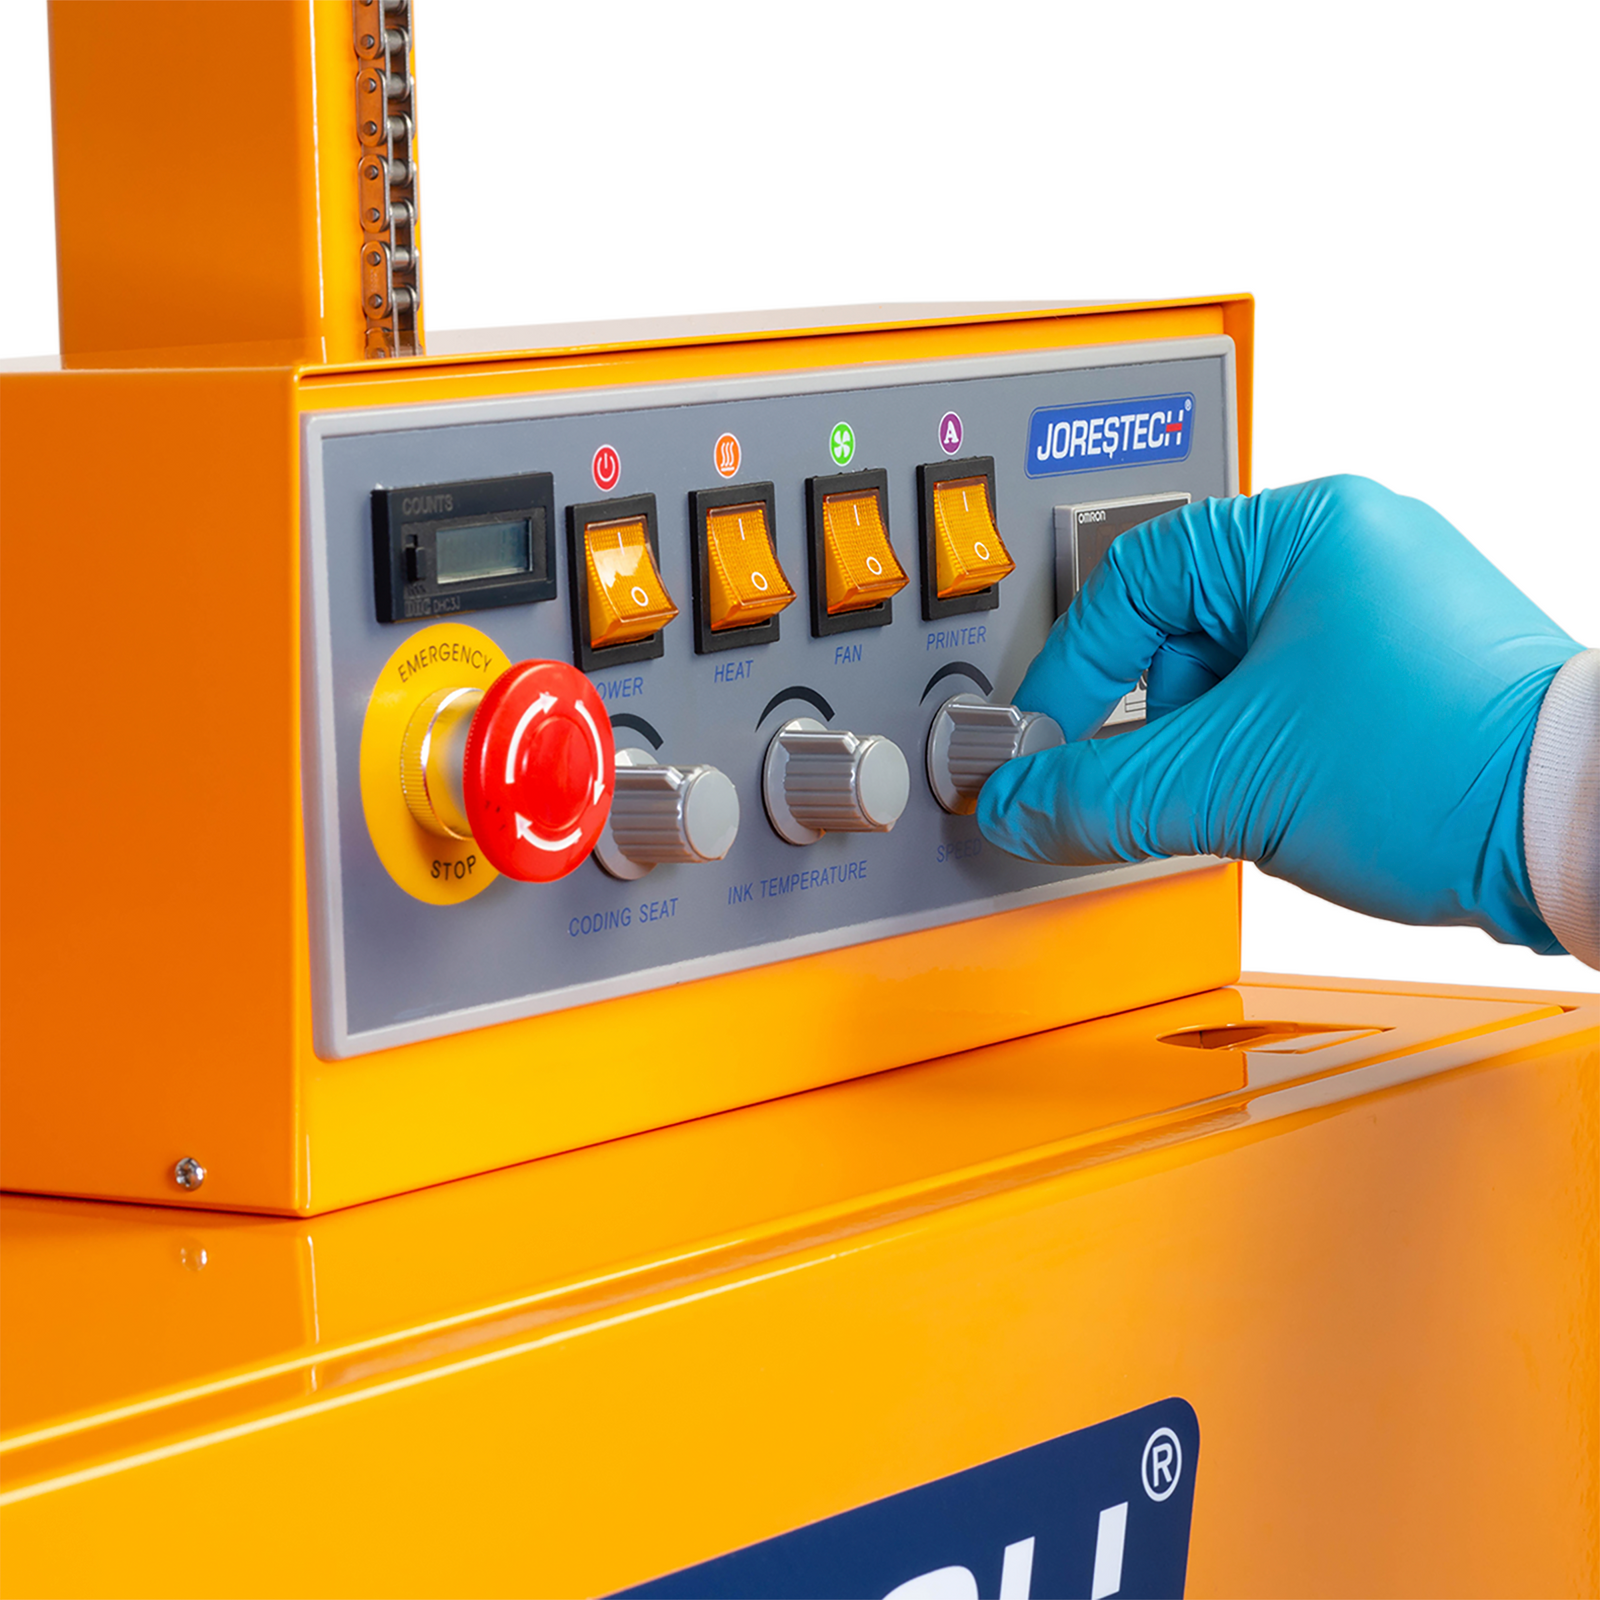 operator wearing blue disposable gloves adjusting speed dial on a grey button on the control panel of the JORESTECH vertical continuous band sealer for large bags with coder.